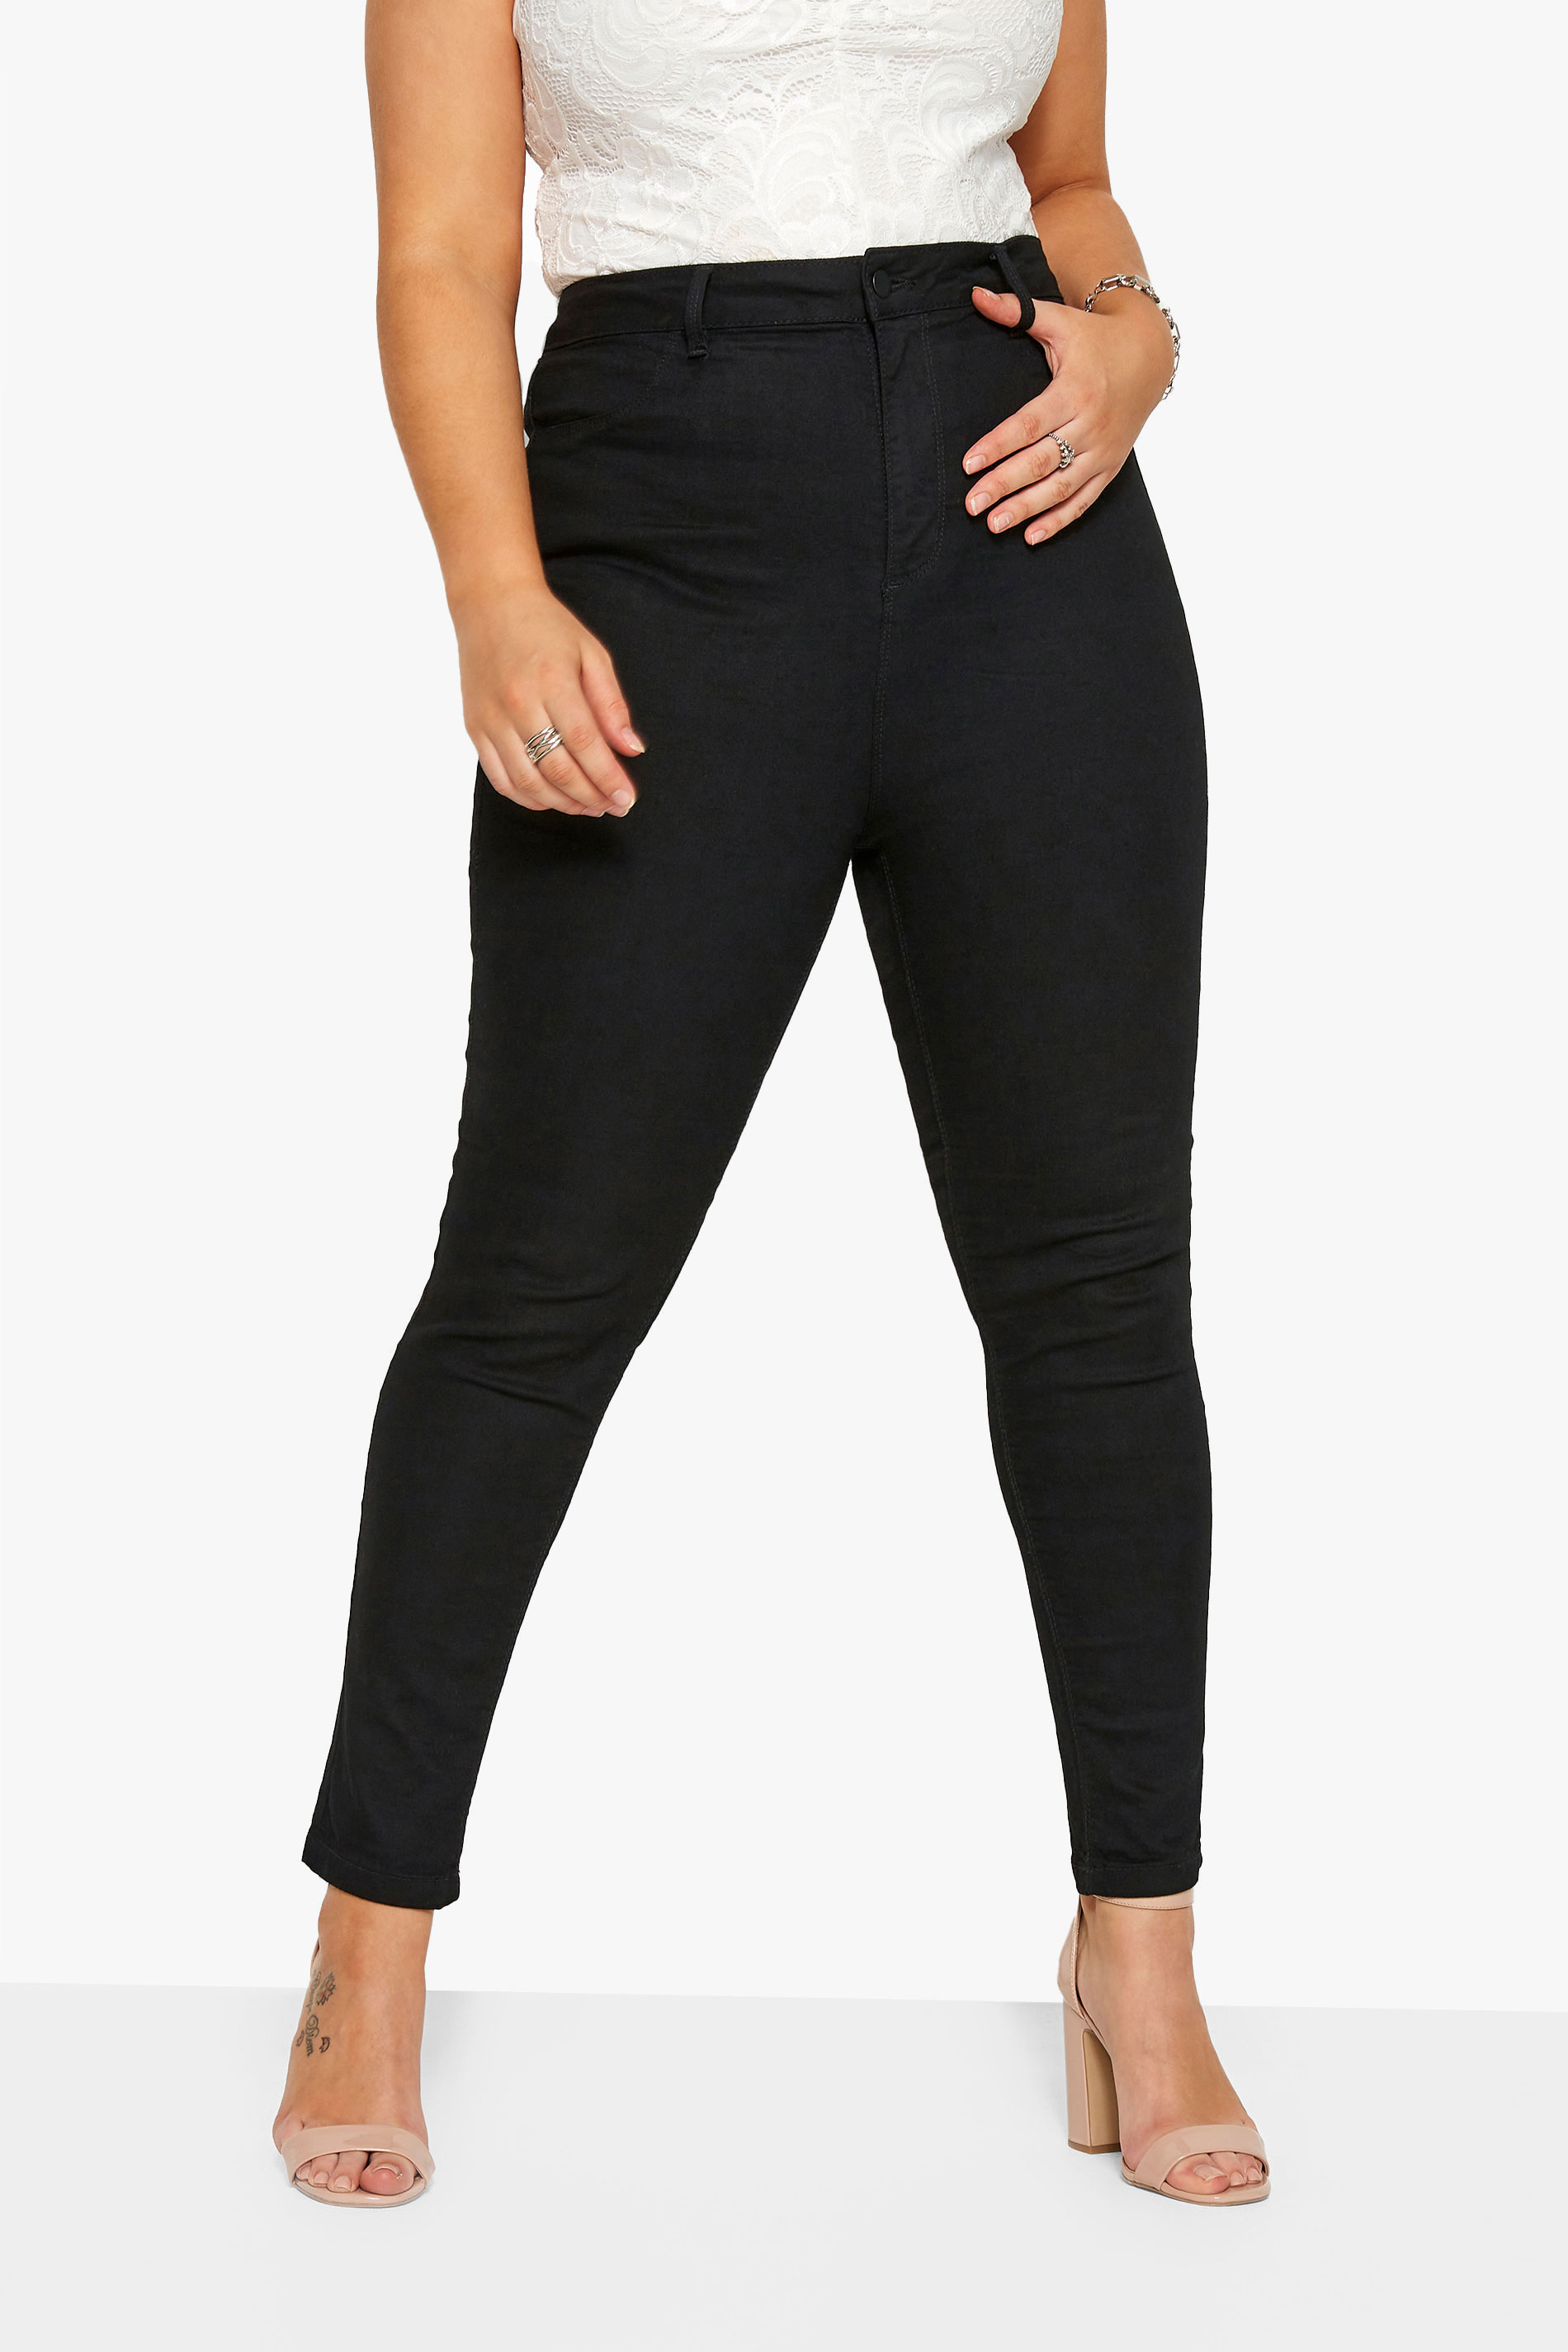 Plus Size Black Skinny Stretch AVA Jeans | Yours Clothing 1